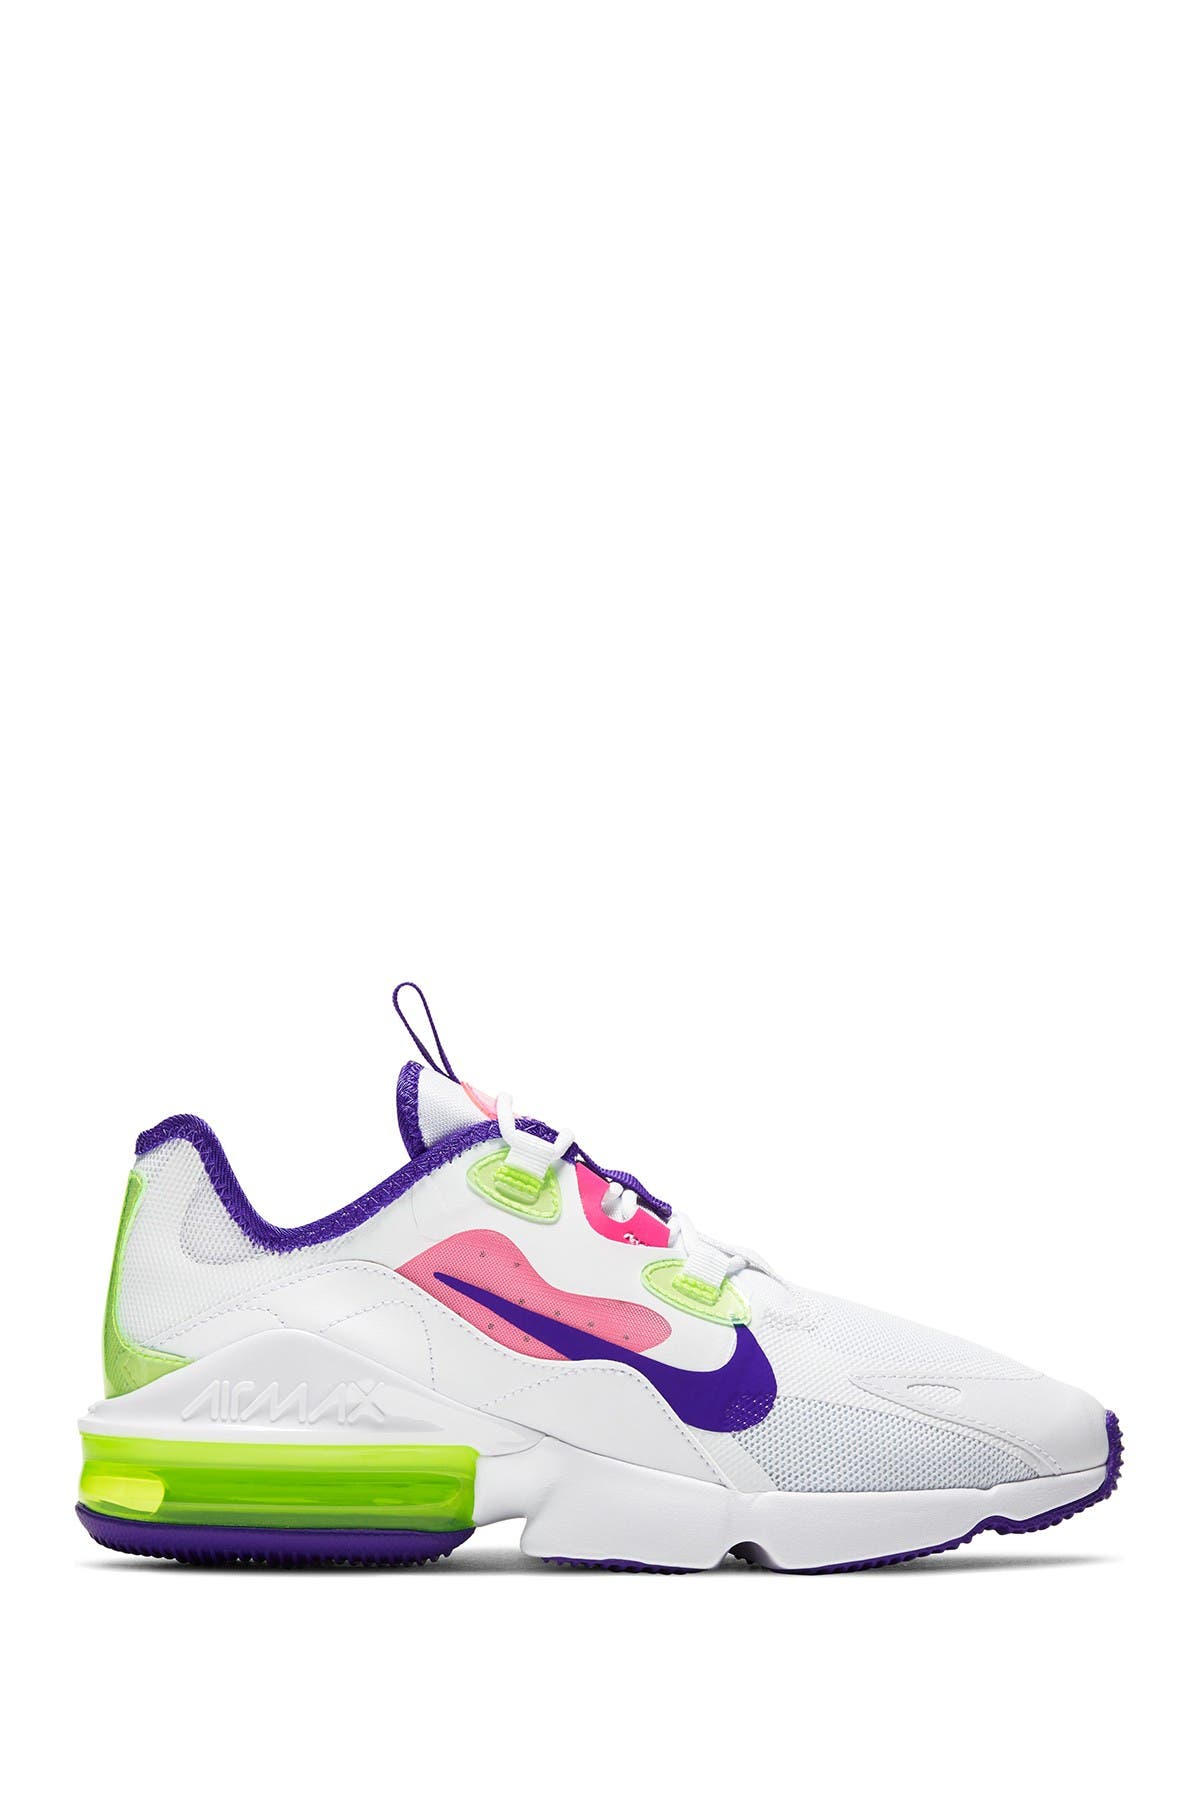 nike shoes toll free number